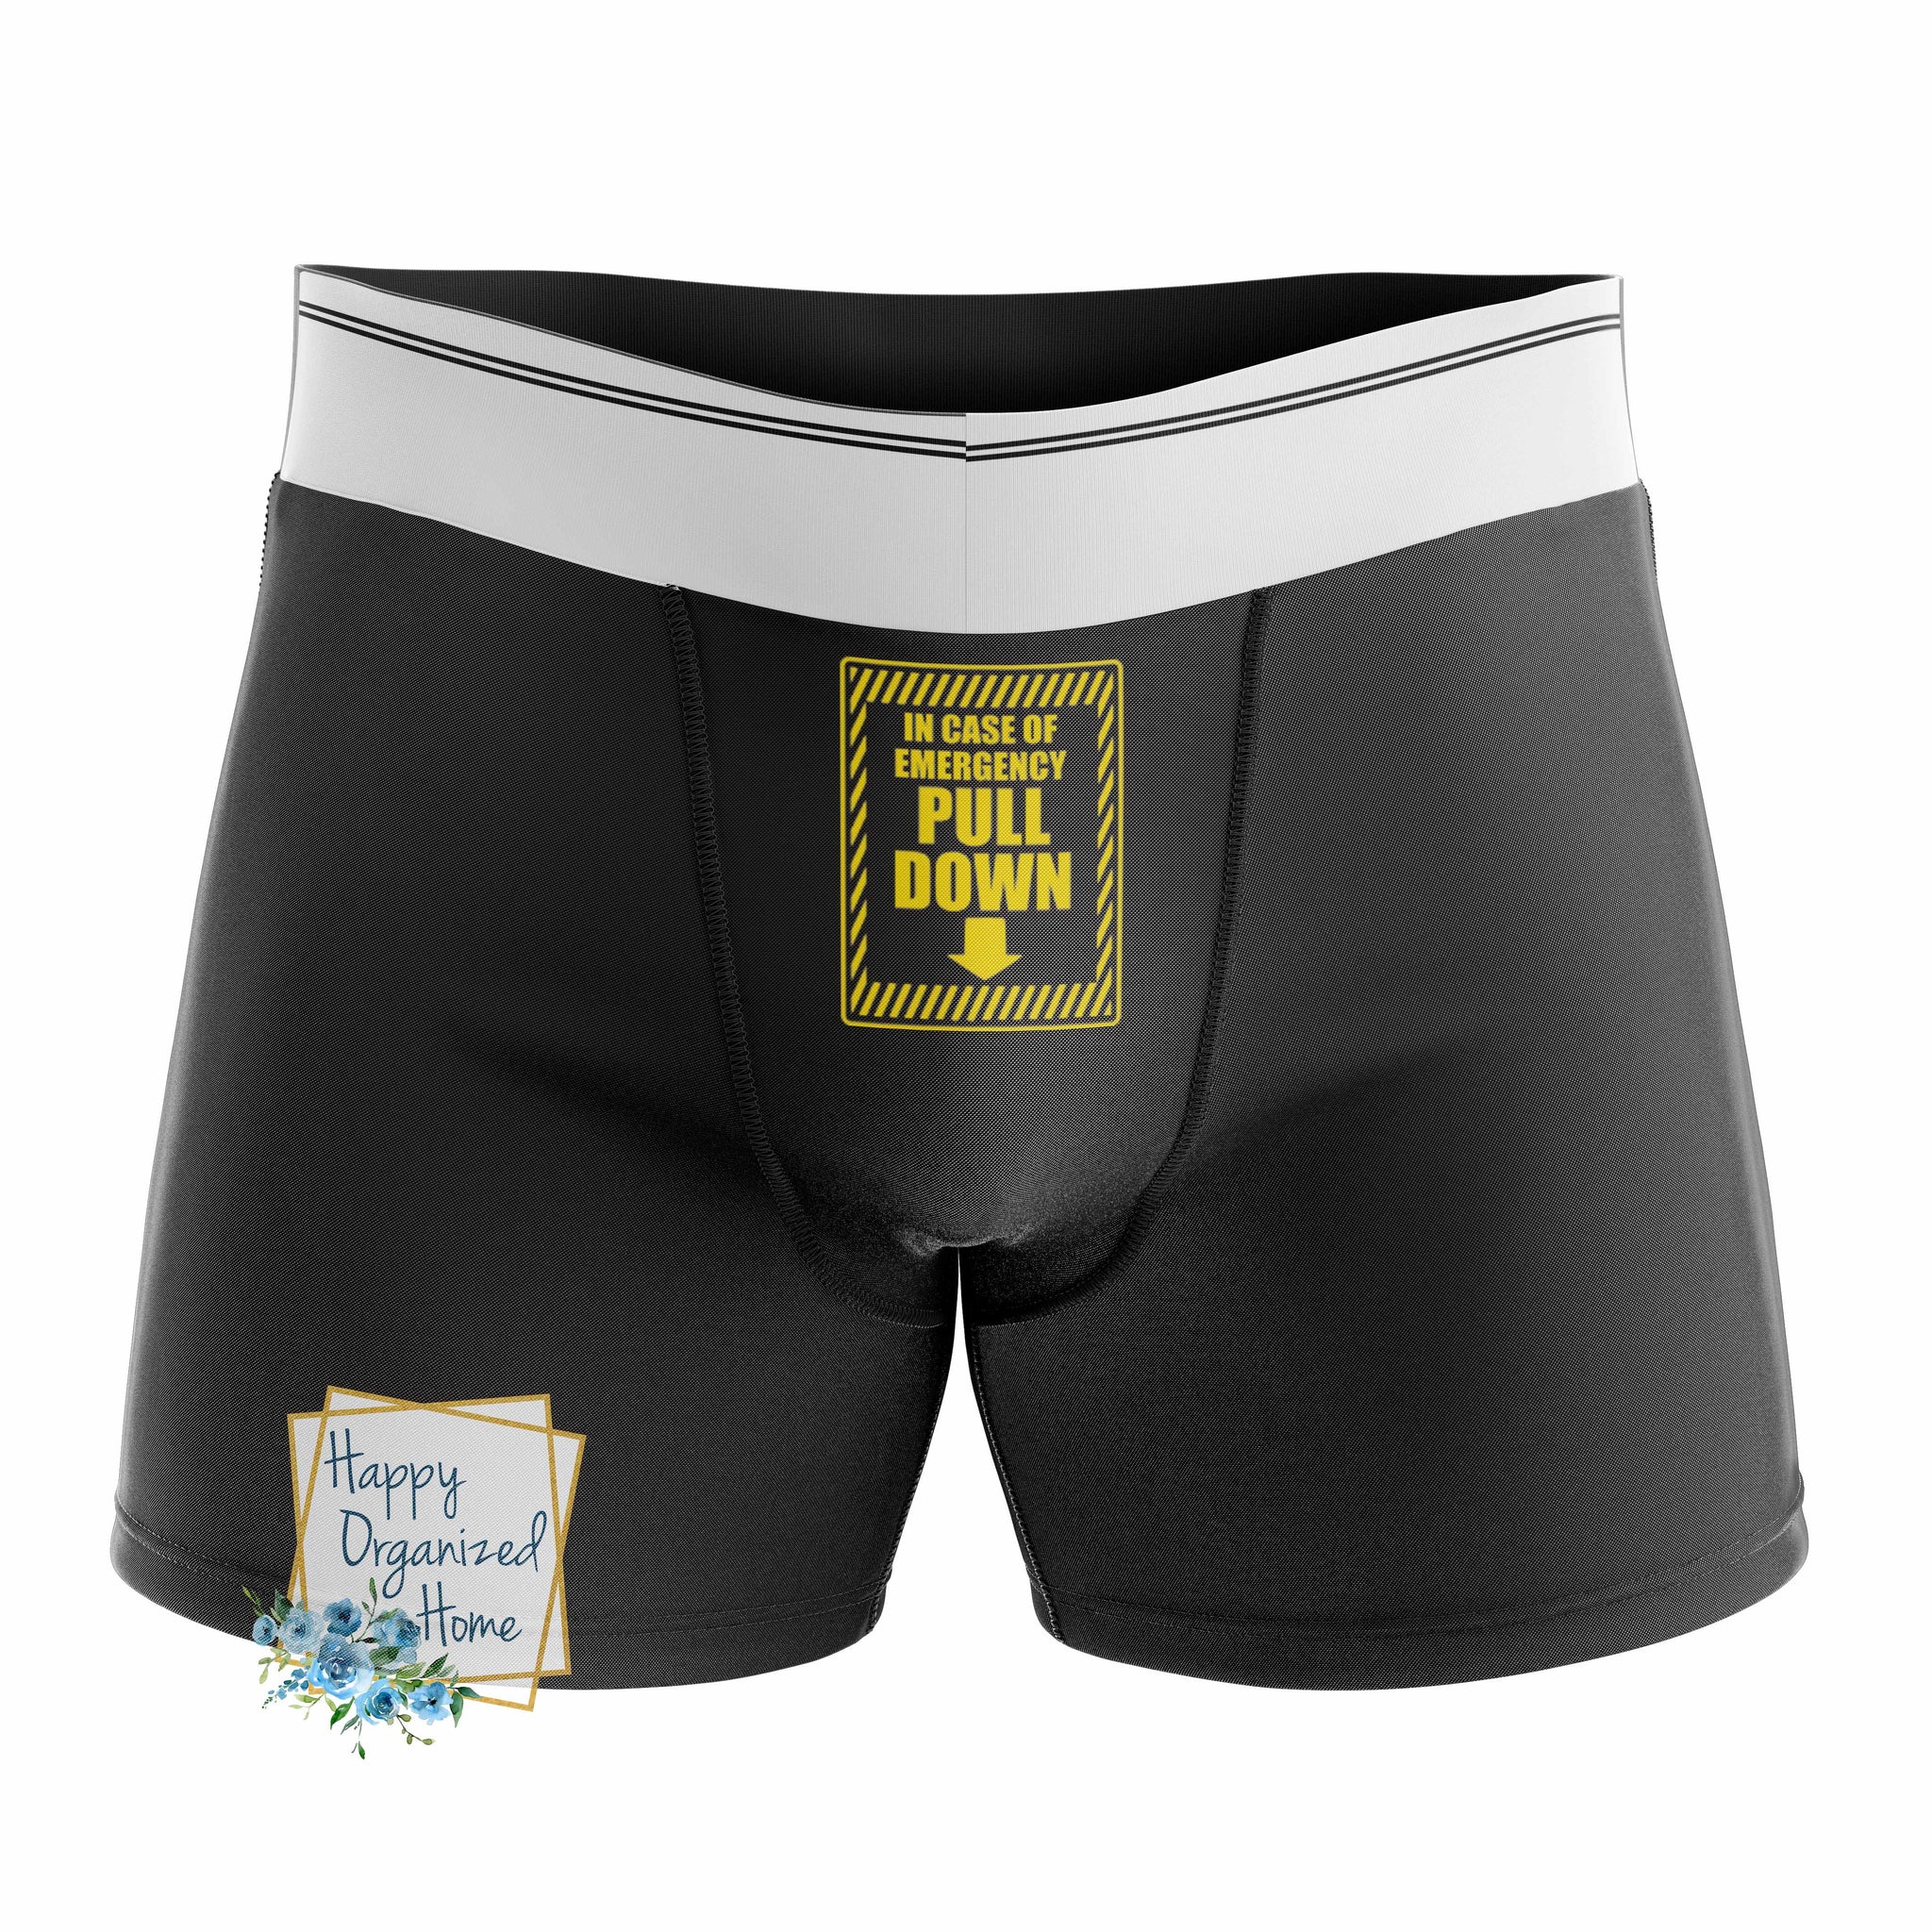 In case of Emergency PULL DOWN Men's Naughty Boxer Briefs